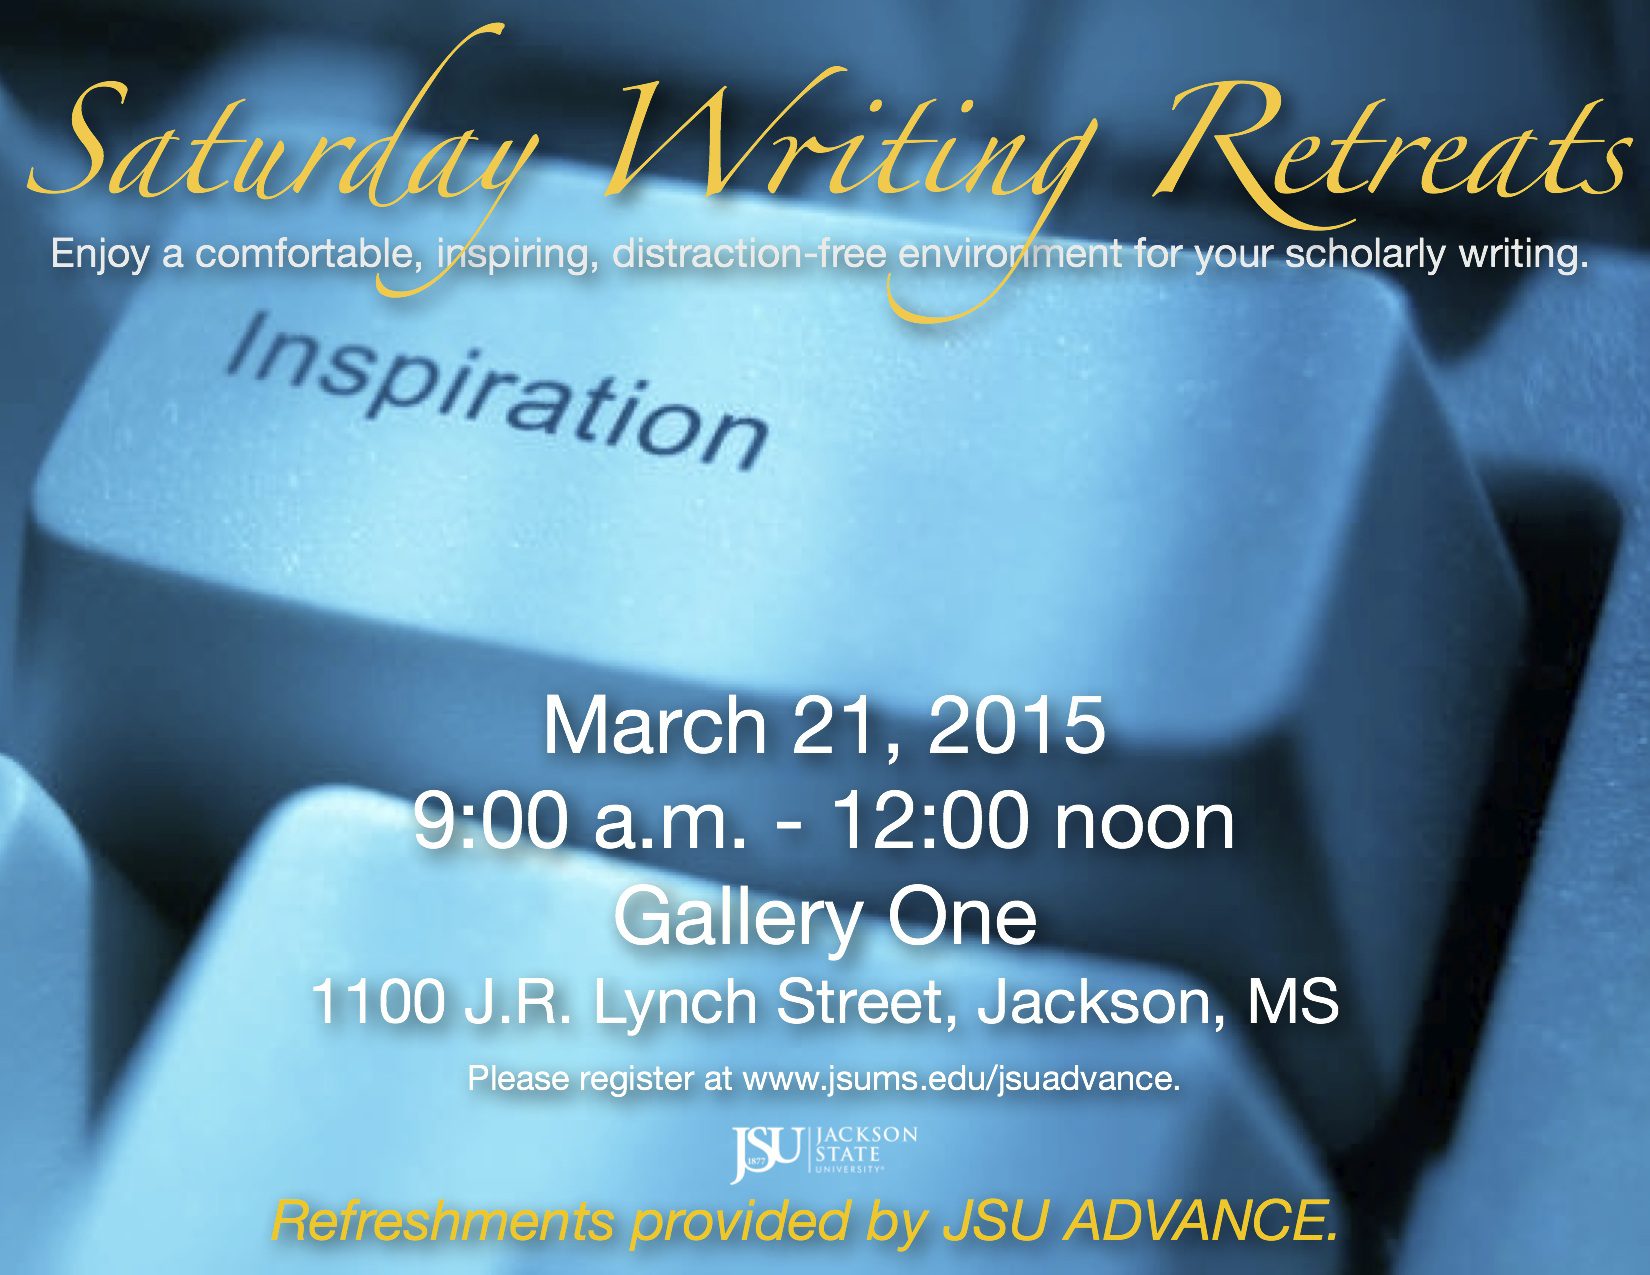 Flyer for Saturday Writing Retreat on Mar. 21